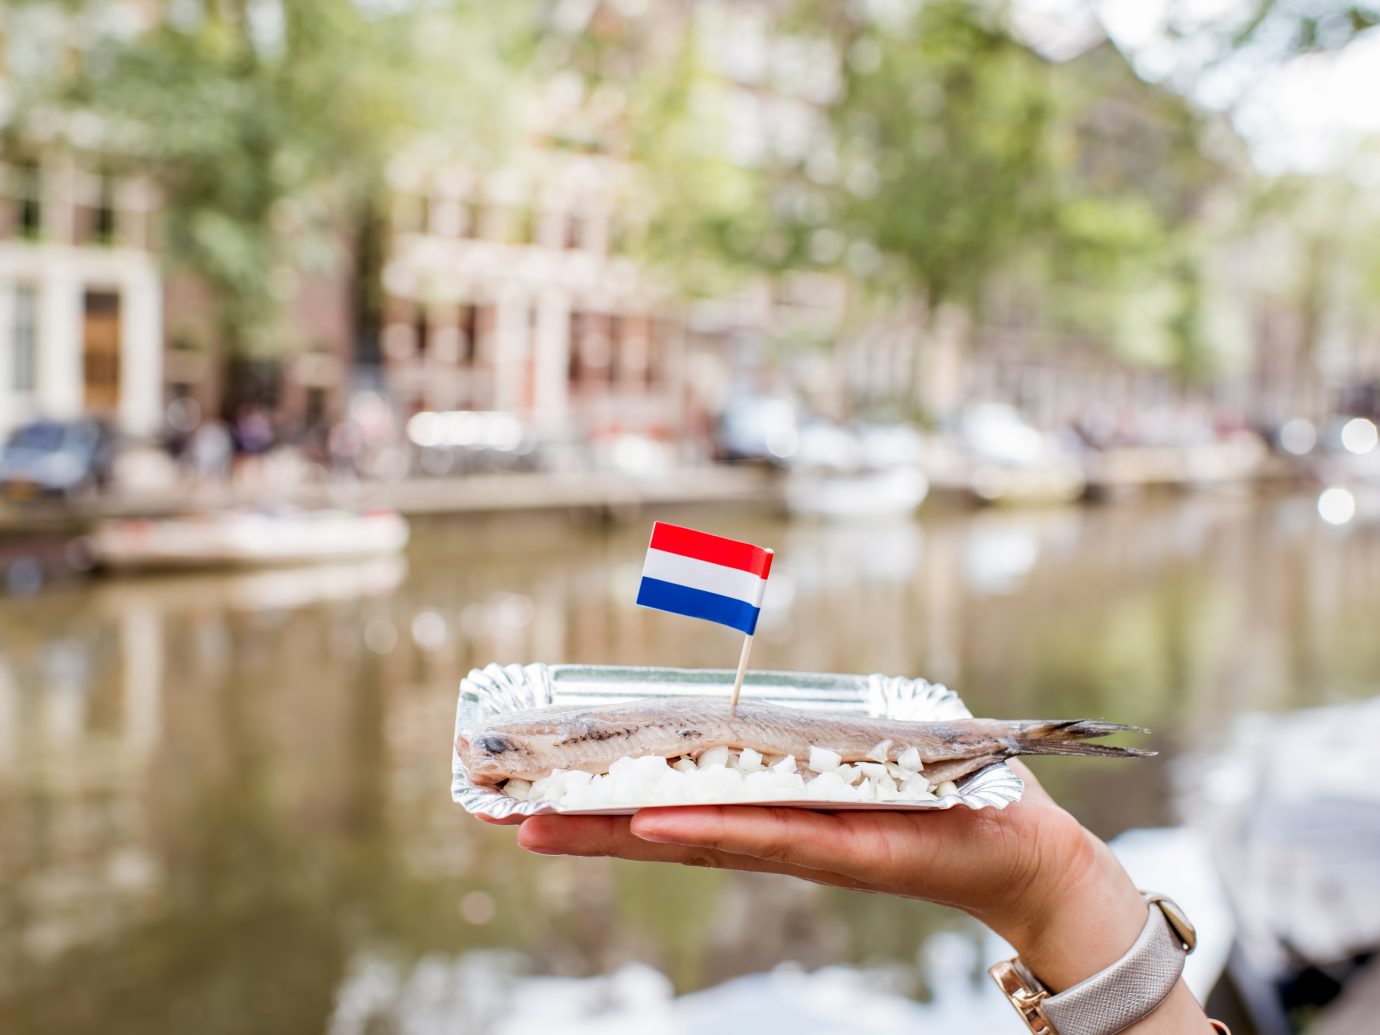 Holding a fresh harring with onion and netherland flag on the water channel background in Amsterdam